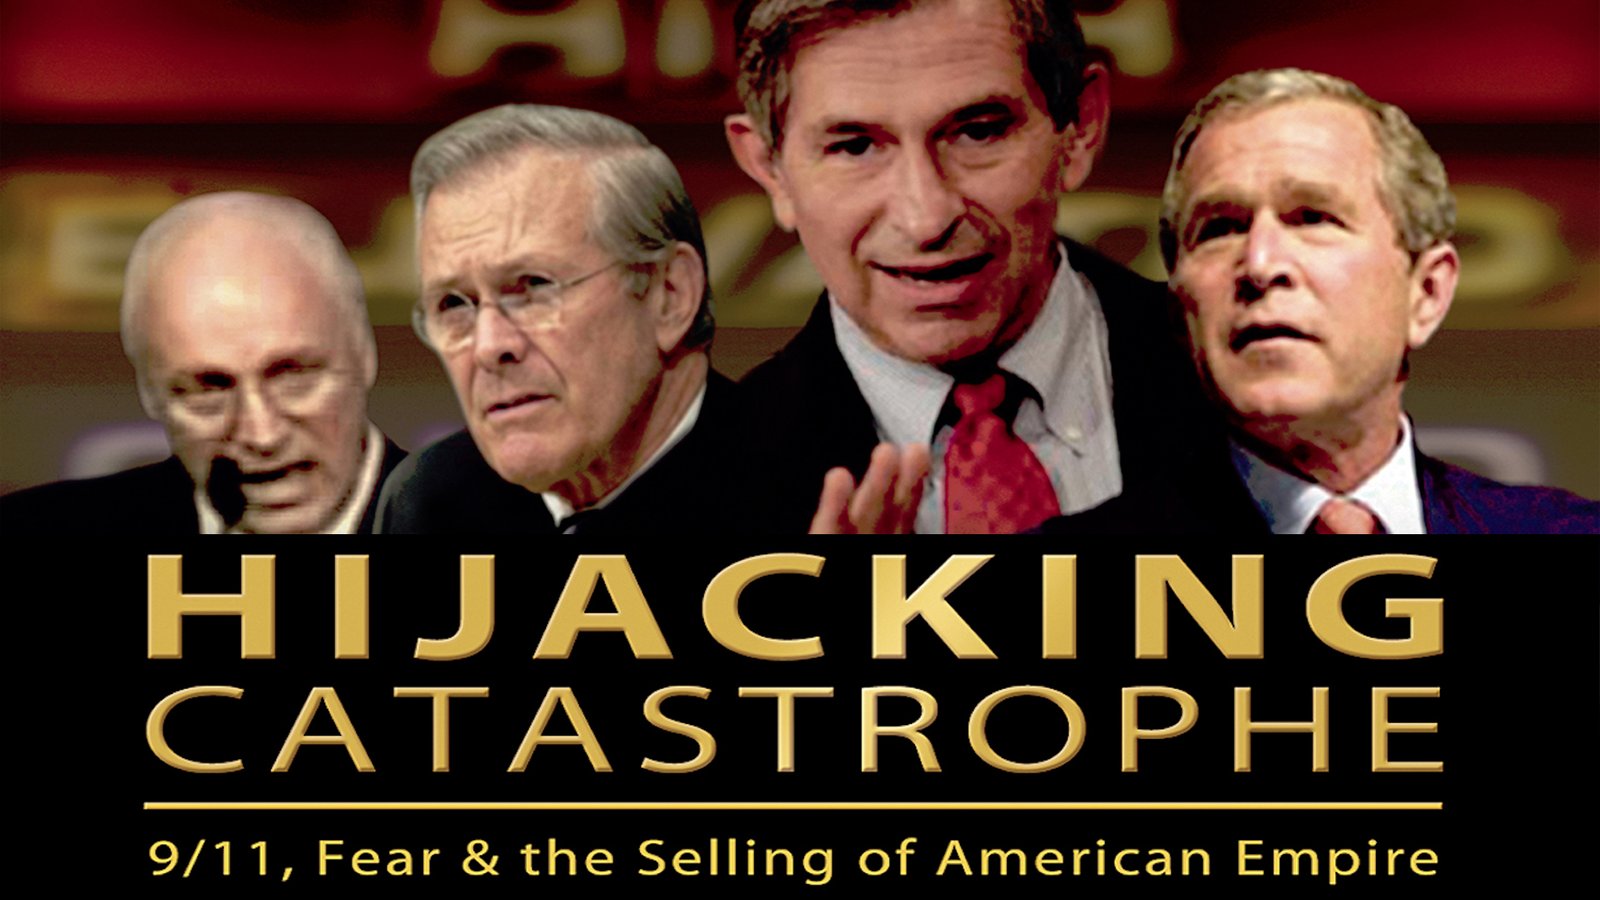 Hijacking Catastrophe - 9/11, Fear & the Selling of the American Empire